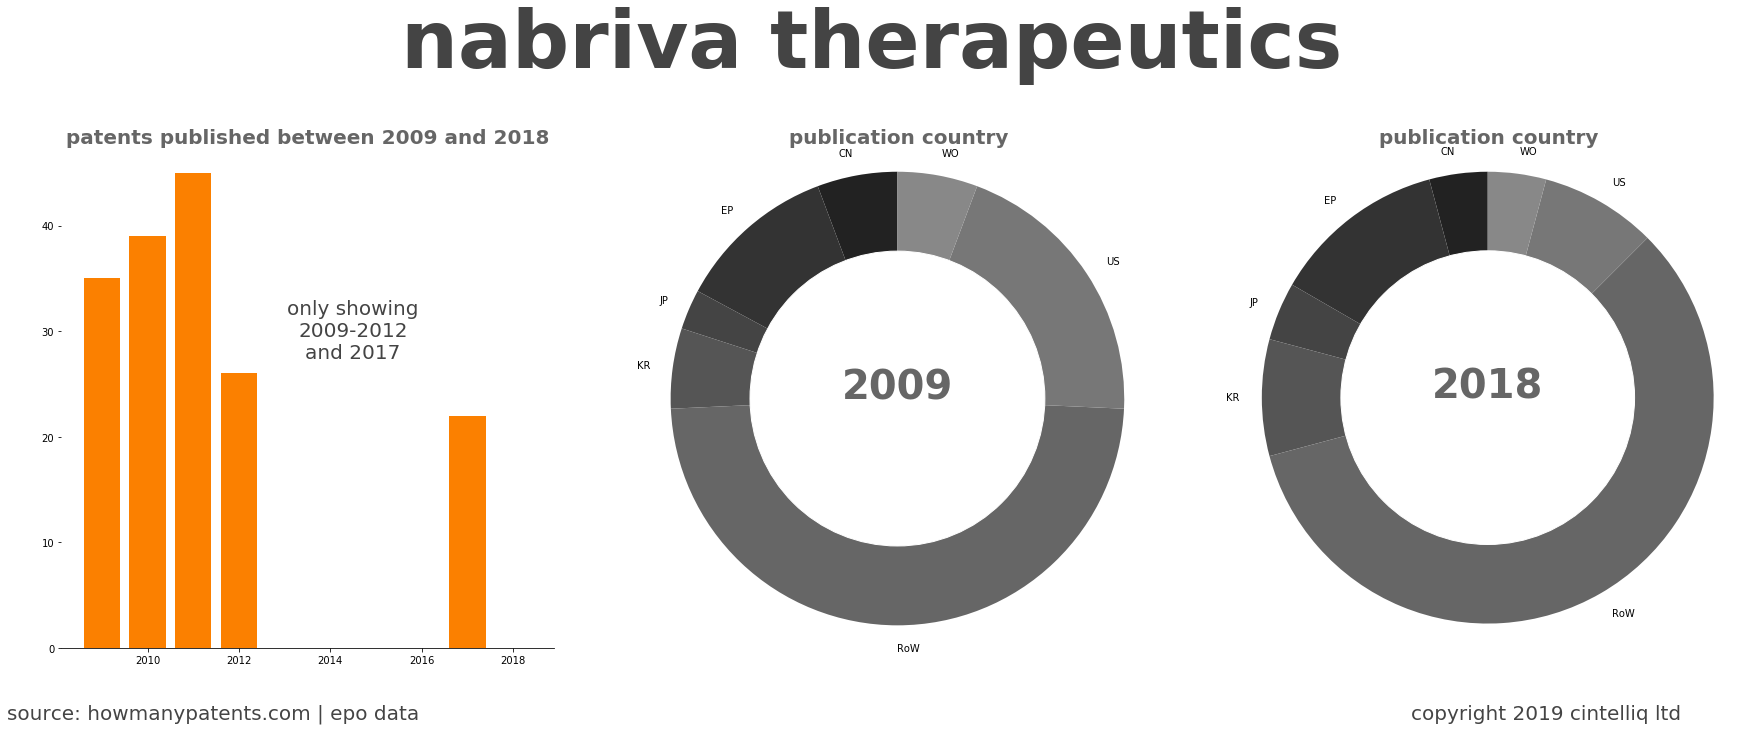 summary of patents for Nabriva Therapeutics